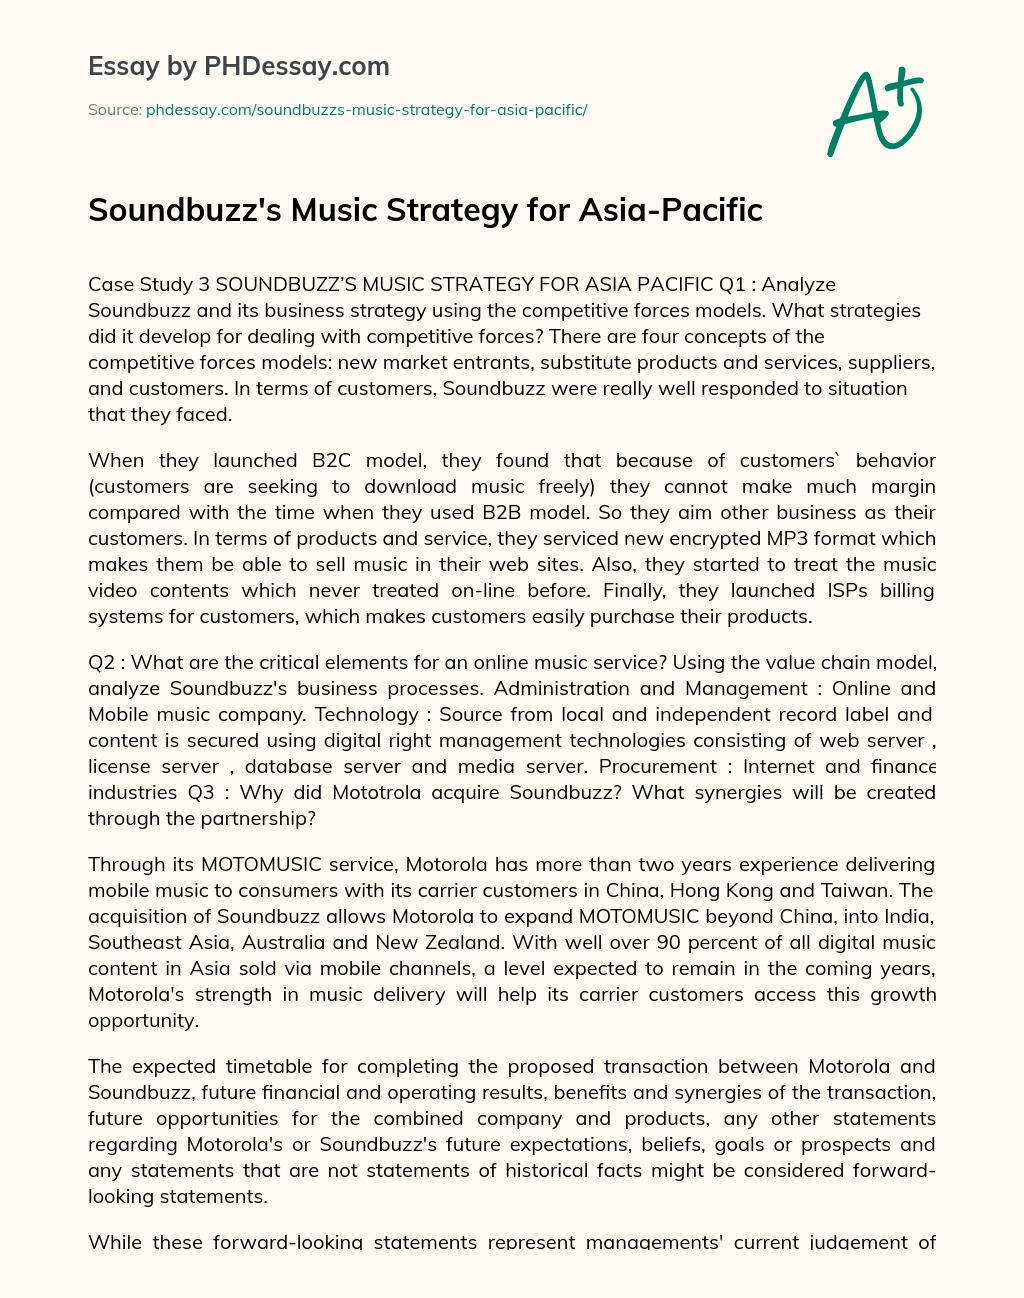 Soundbuzz’s Music Strategy for Asia-Pacific essay